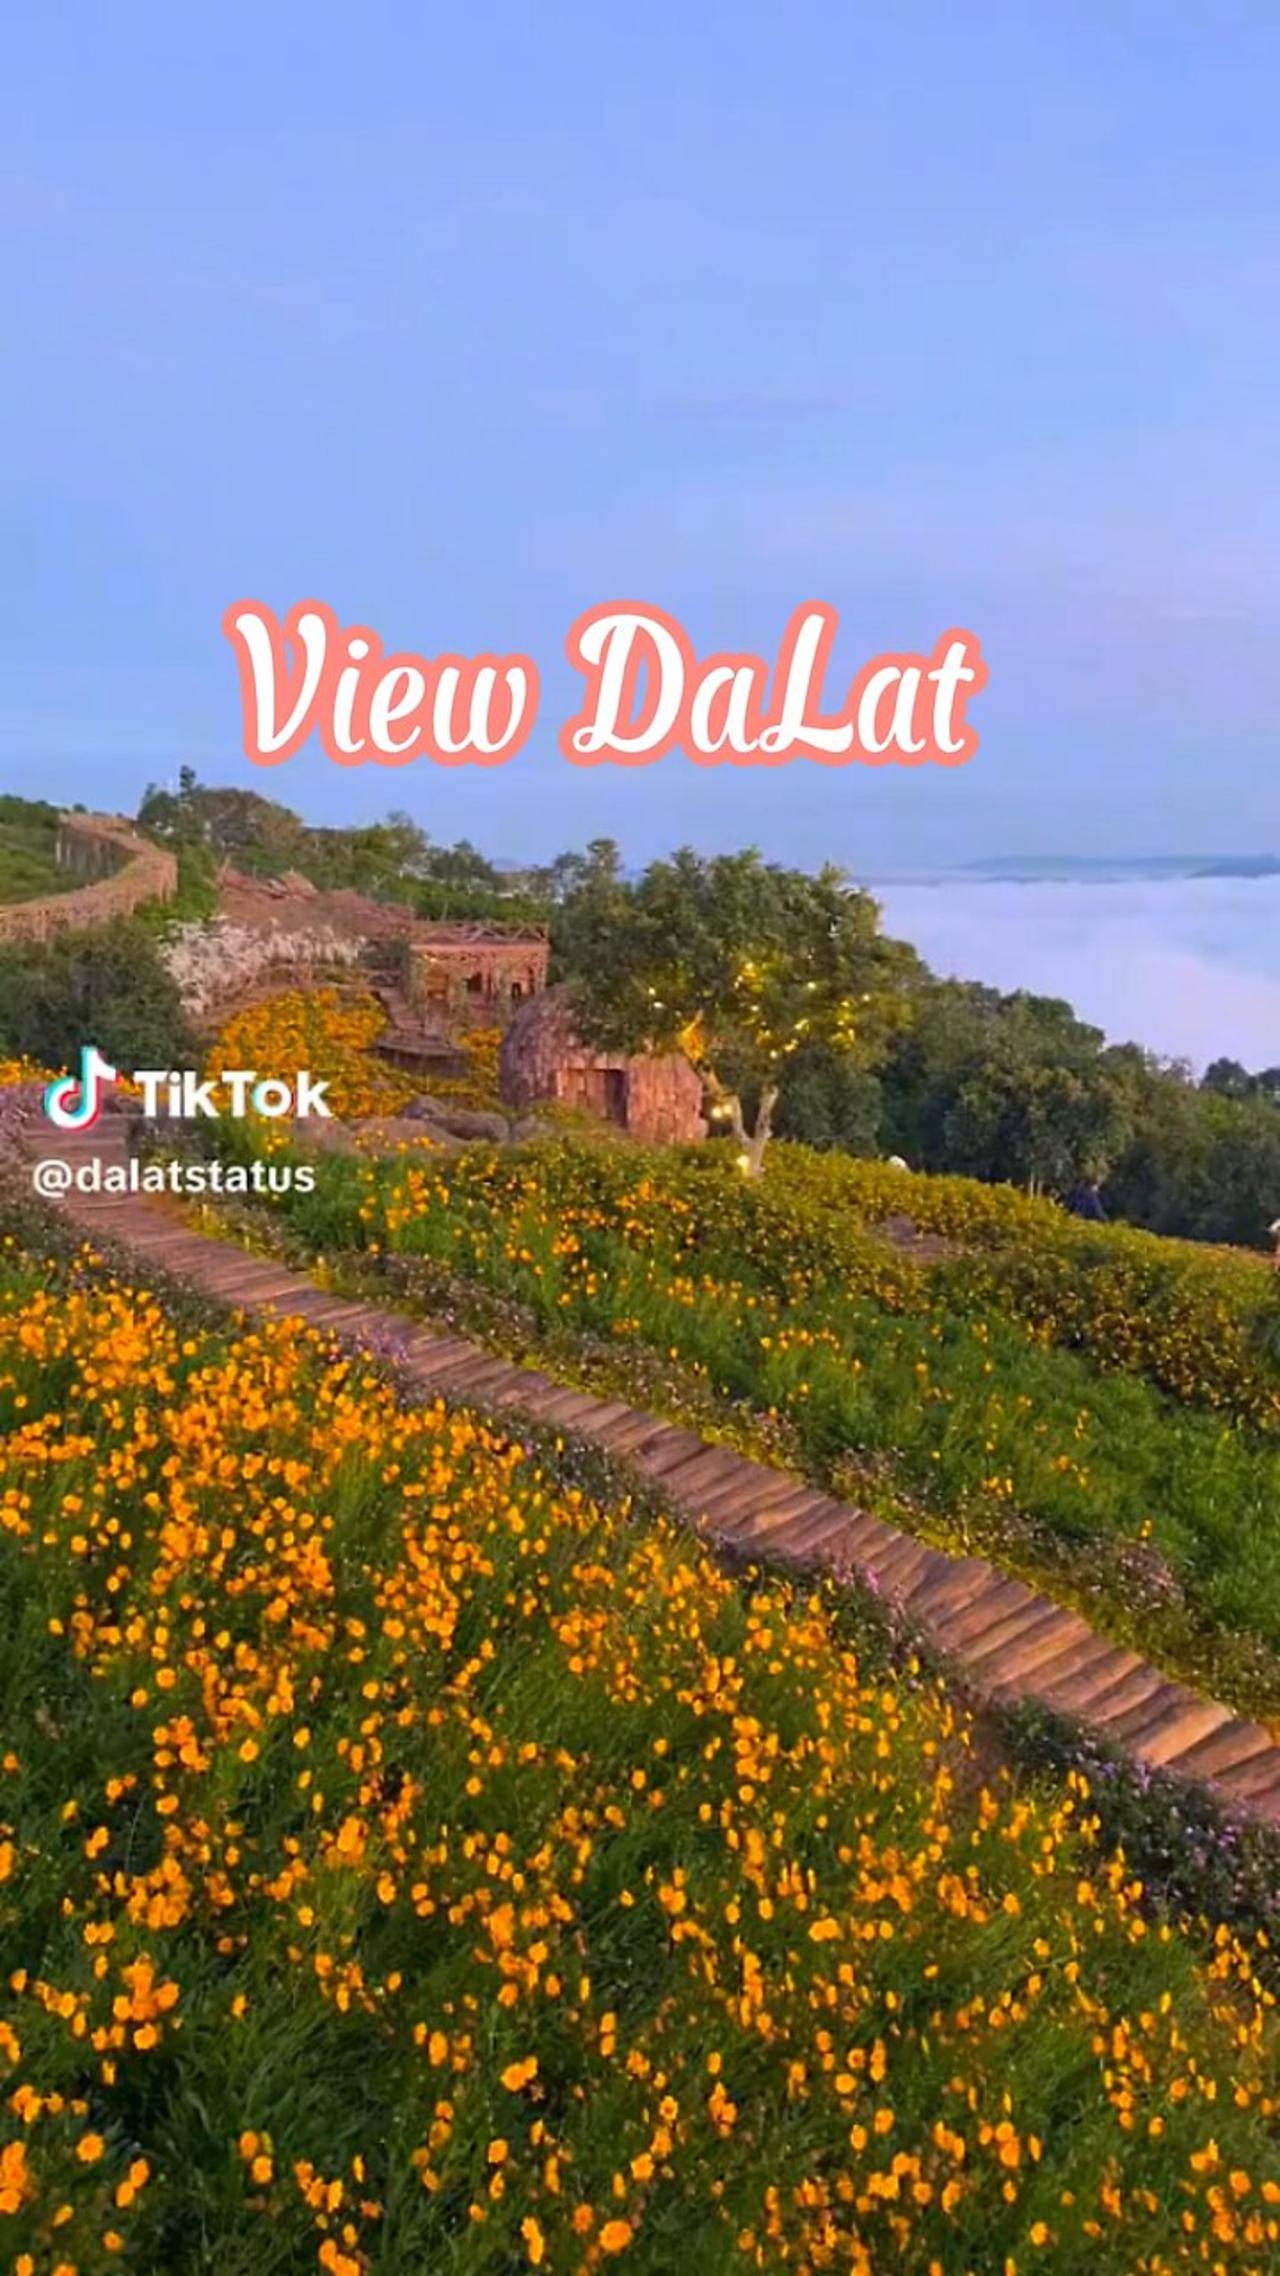 Da Lat, one of the most beautiful view in Viet Nam. Well come to Viet Nam 😘